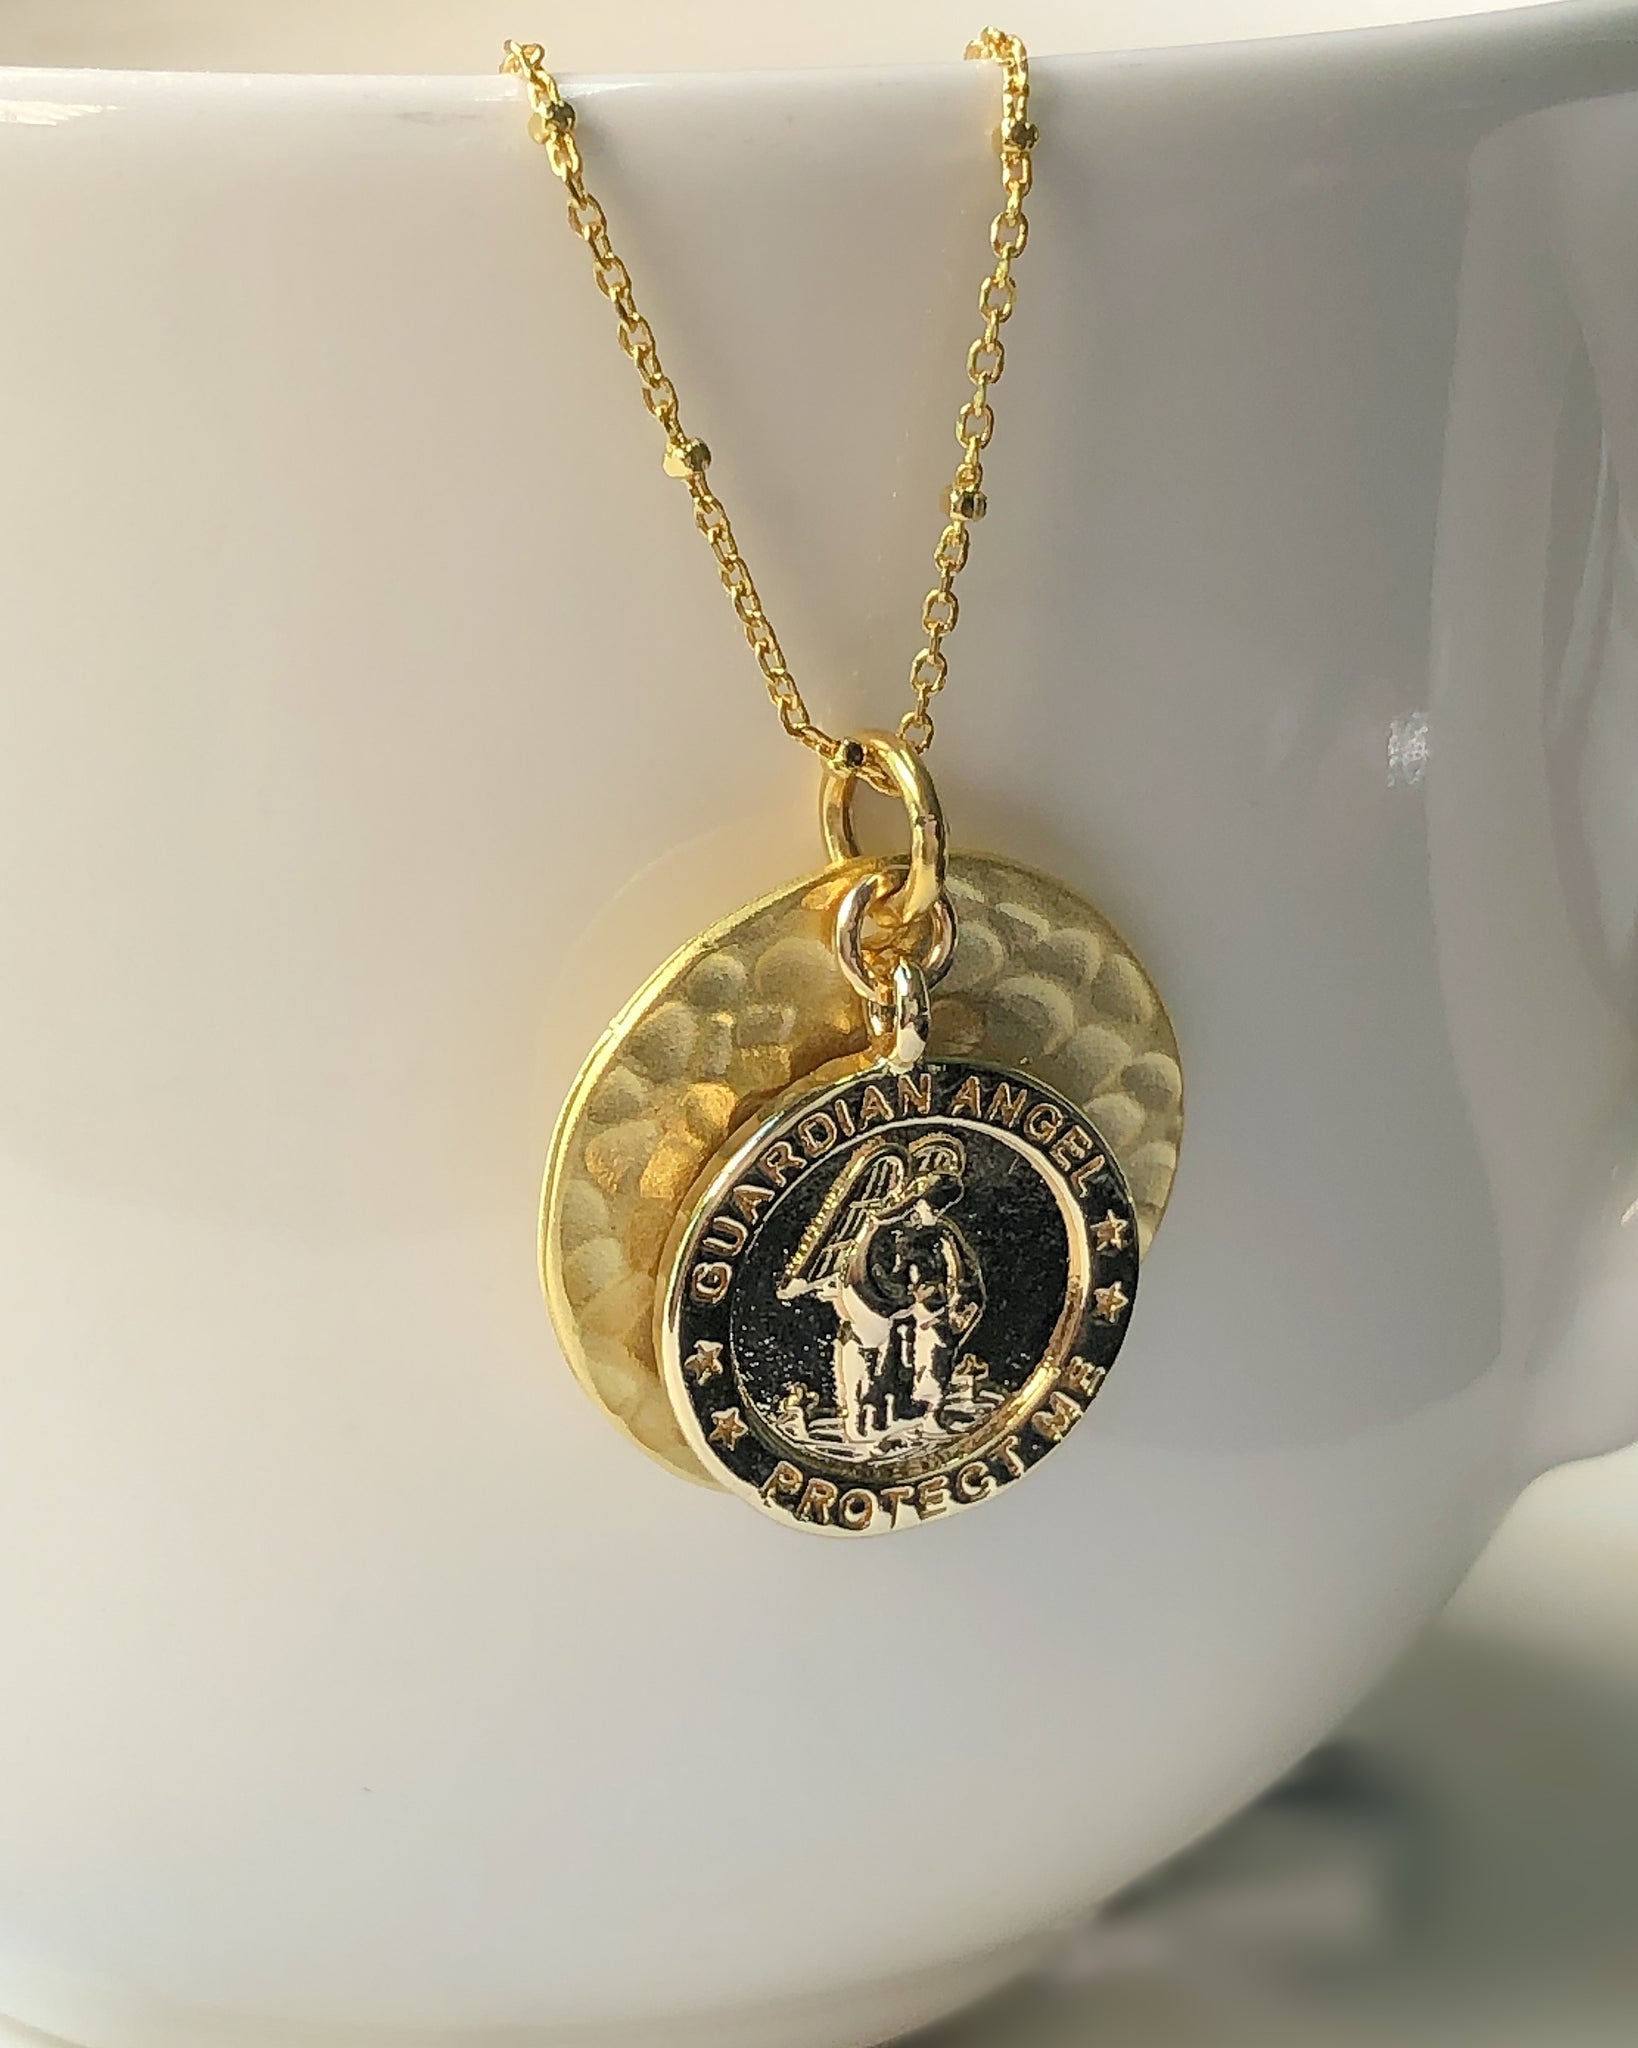 2016 Guardian Angel Gold Silver Pendant Necklace - Hooked on Hallmark  Ornaments